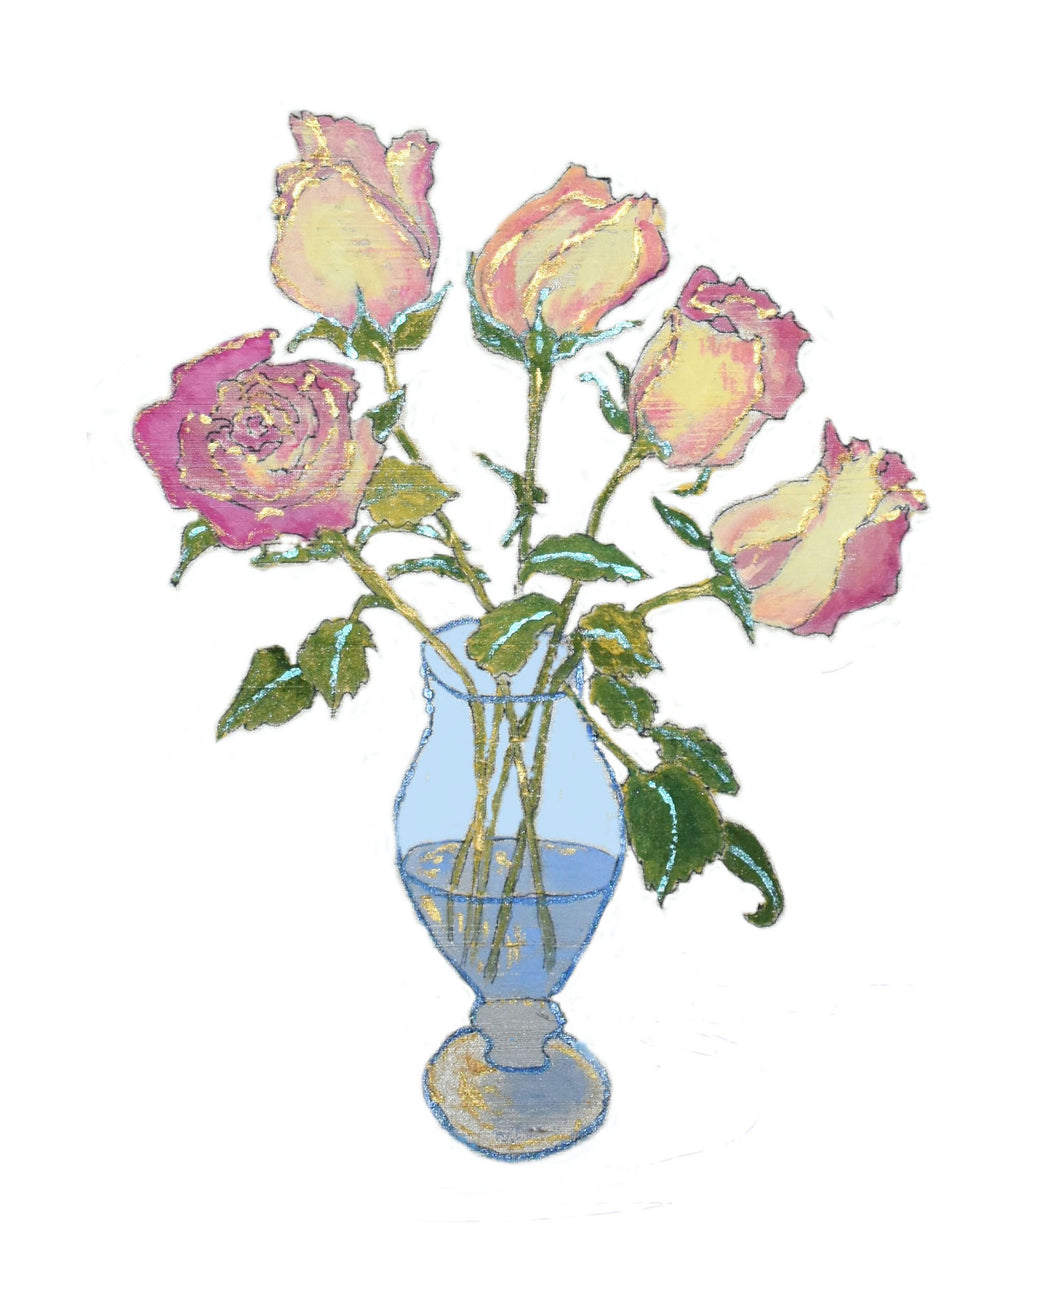 Roses in a Vase Print on Hahnemuhle Art Paper 11x14 with mat